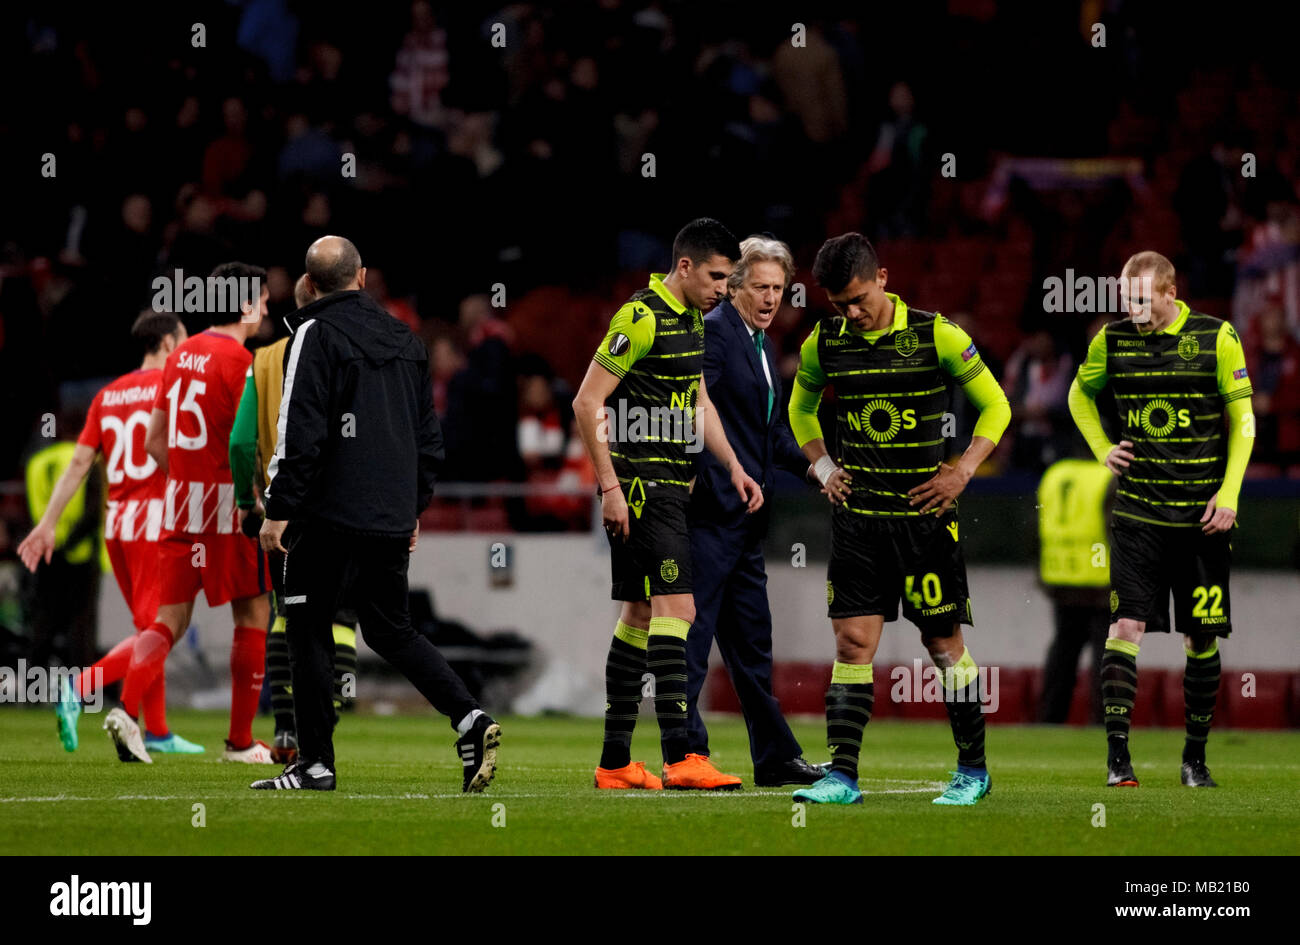 Jorge Jesus of Sporting Portugal talk to his players at the end of the UEFA Europe League 2017/18 quarter finals, first leg match between Atletico de Madrid and Sporting Portugal, at Wanda Metropolitano Stadium in Madrid on April 5, 2018. (Photo by Guille Martinez/Cordon Press) Stock Photo